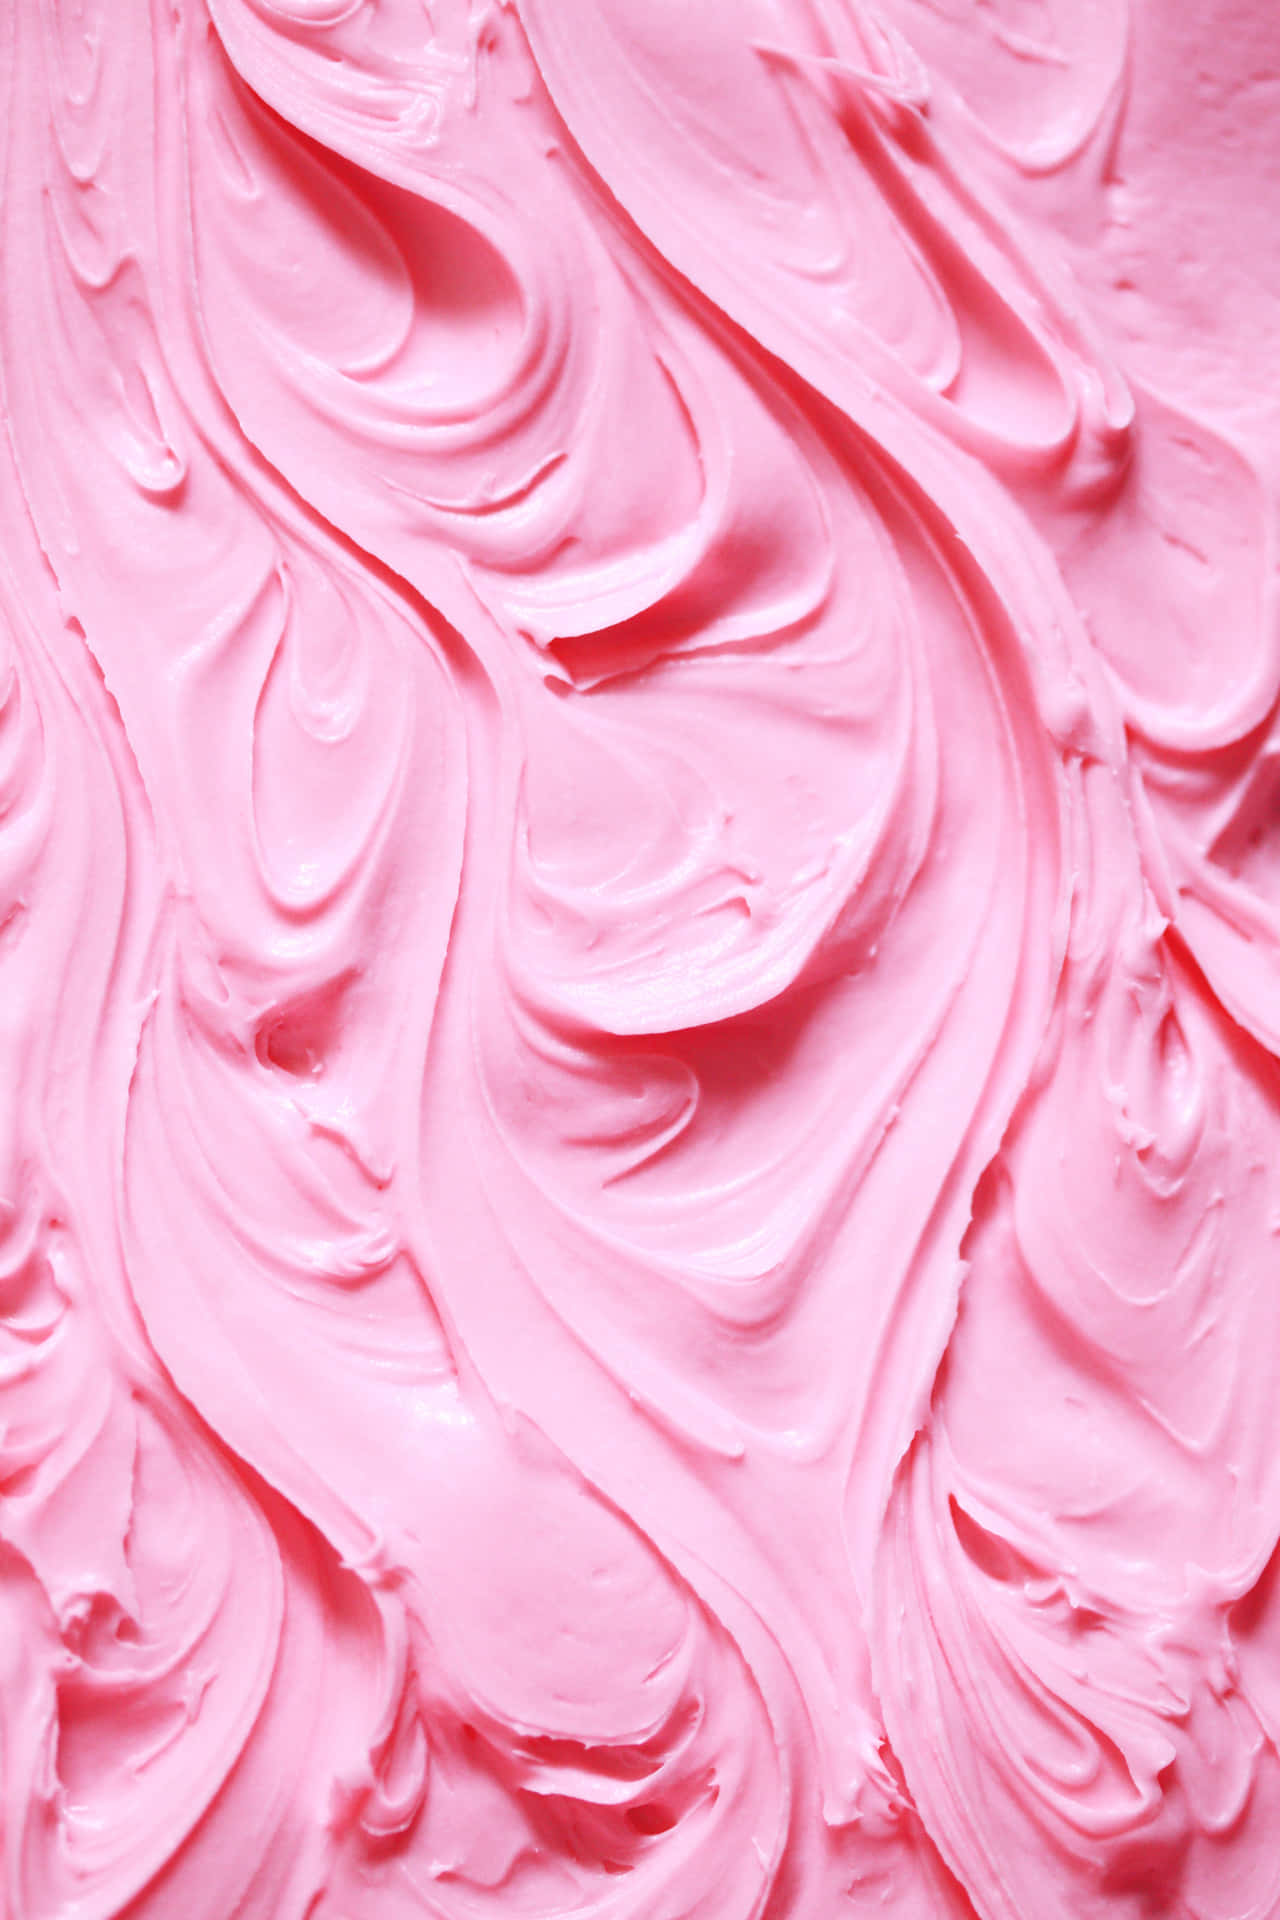 Simple Pink Smears Wallpaper